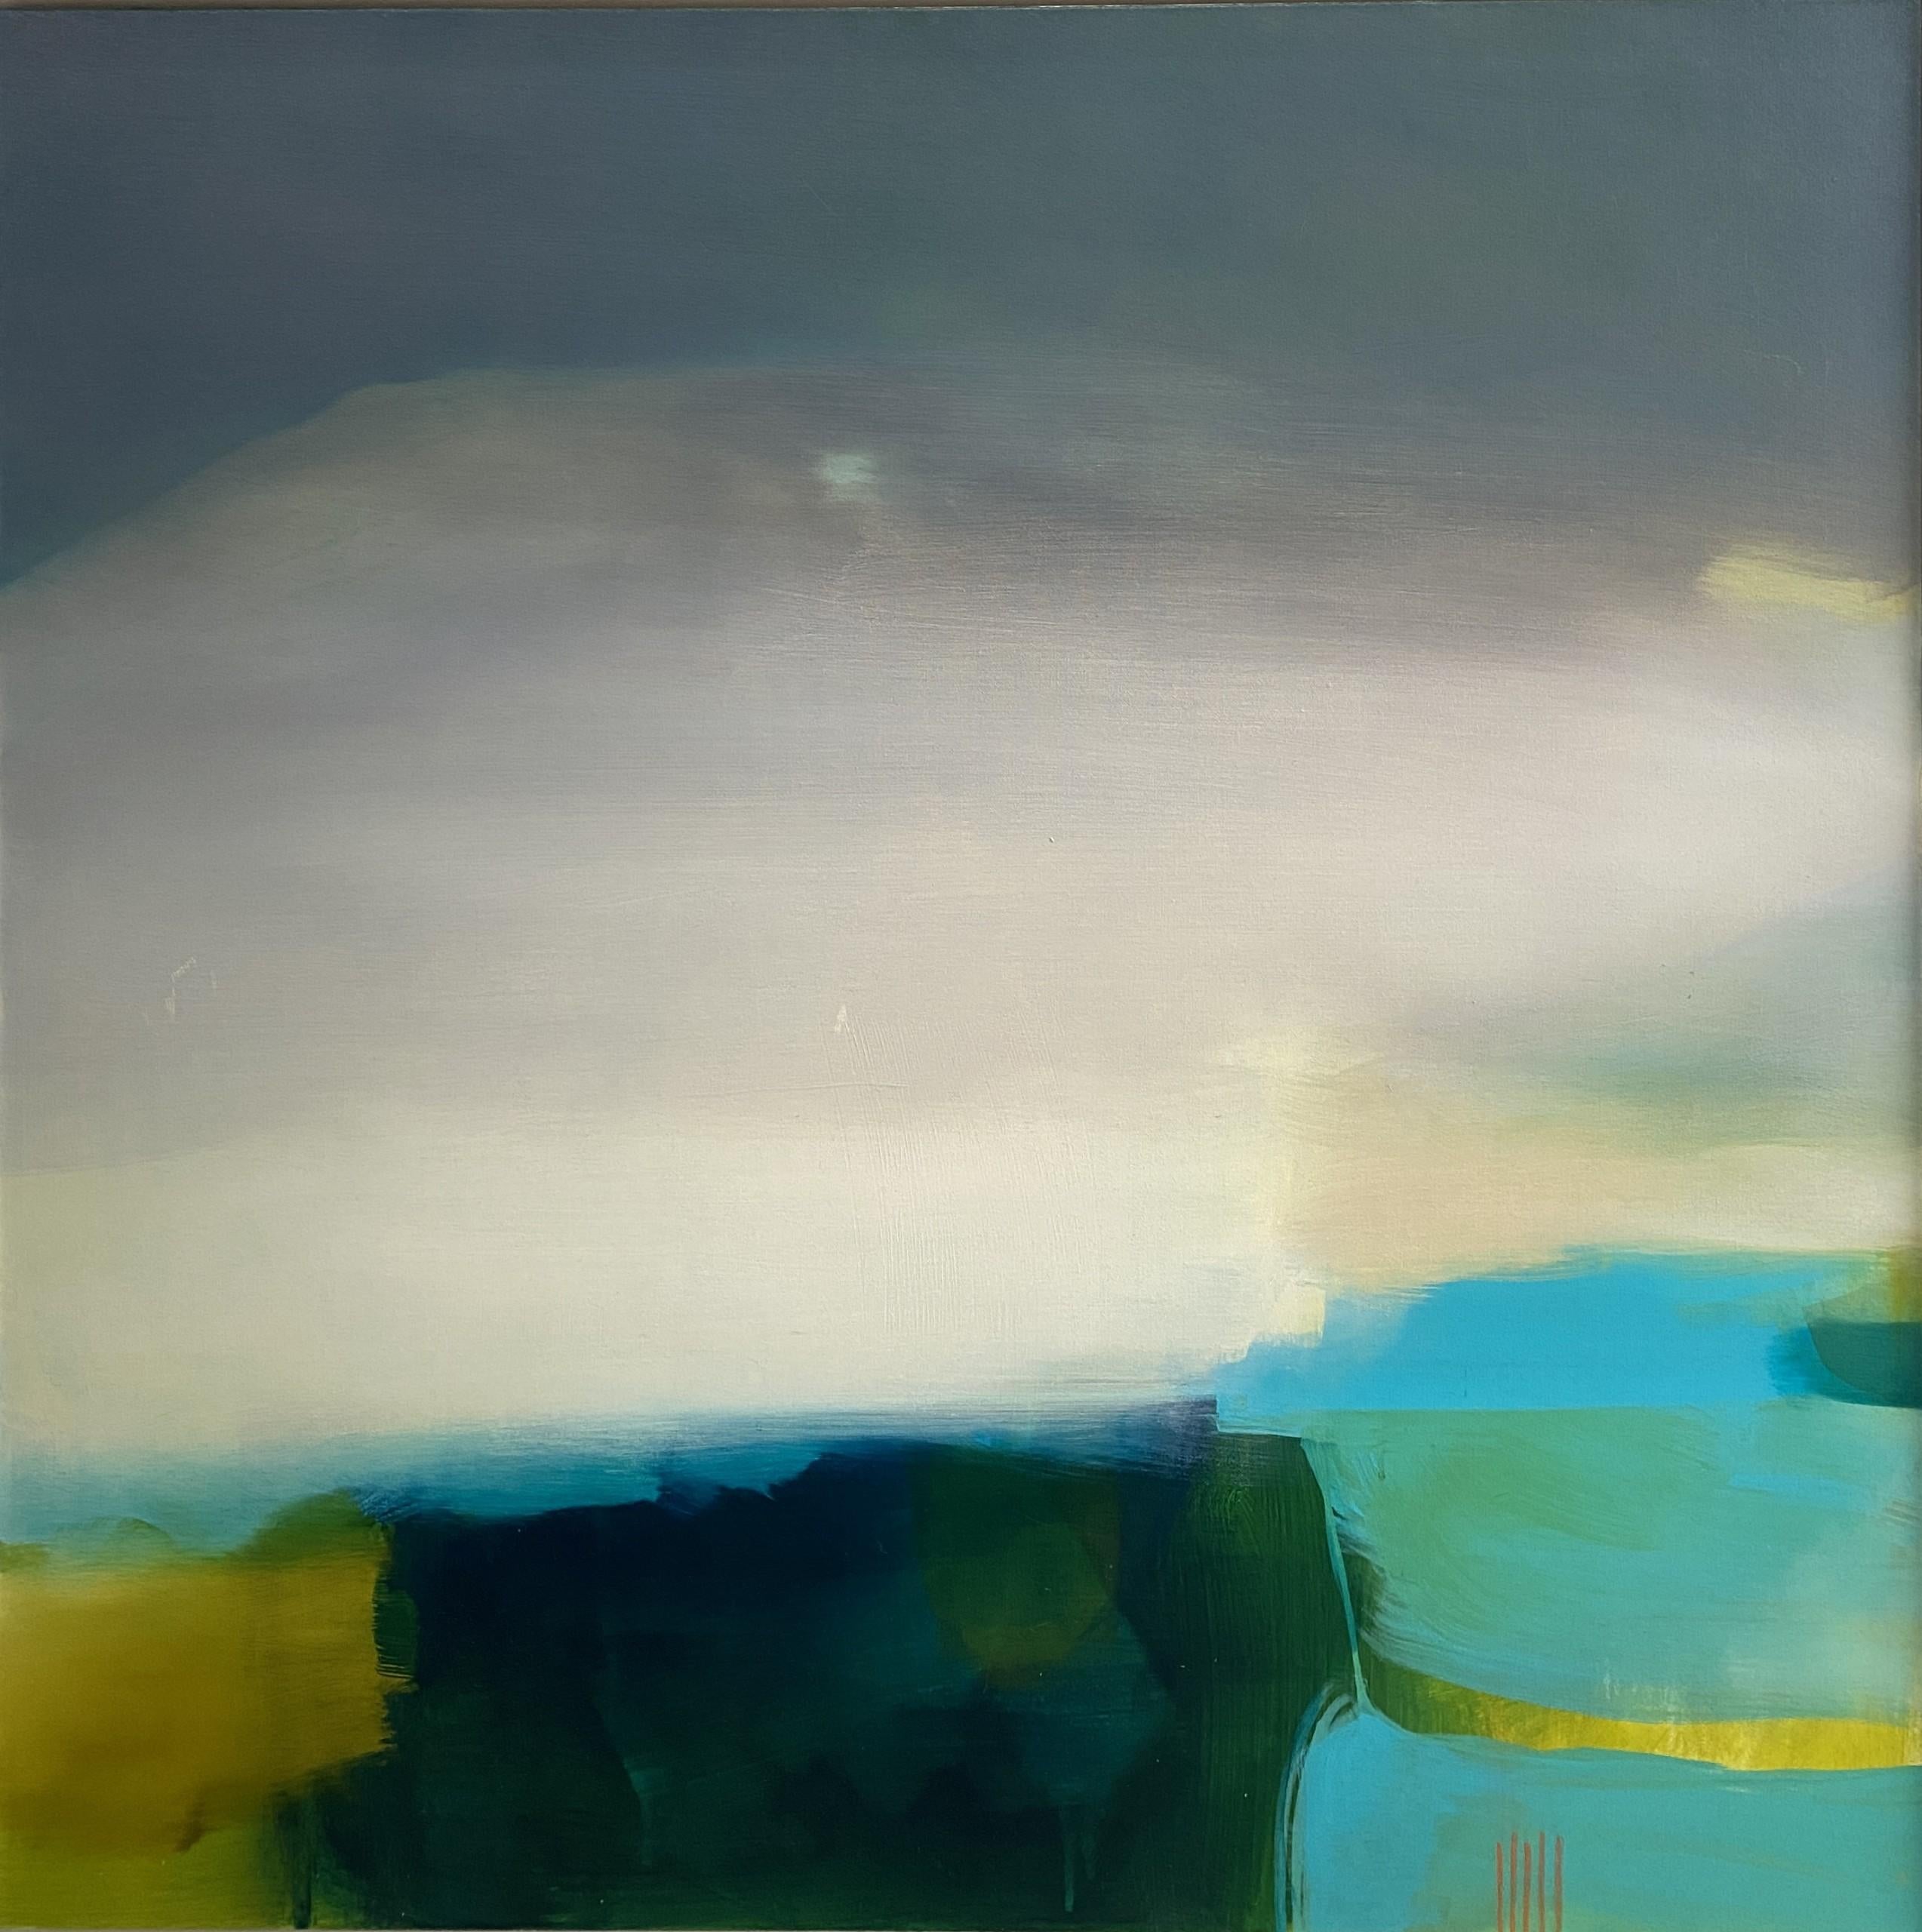 That Year! by Laura Rich [2021]

A contemporary landscape painting inspired by the Wiltshire landscape where I walked for an hour every day during the 2020 lockdown. The weather was warm and bright but the mood of the country was not. Original